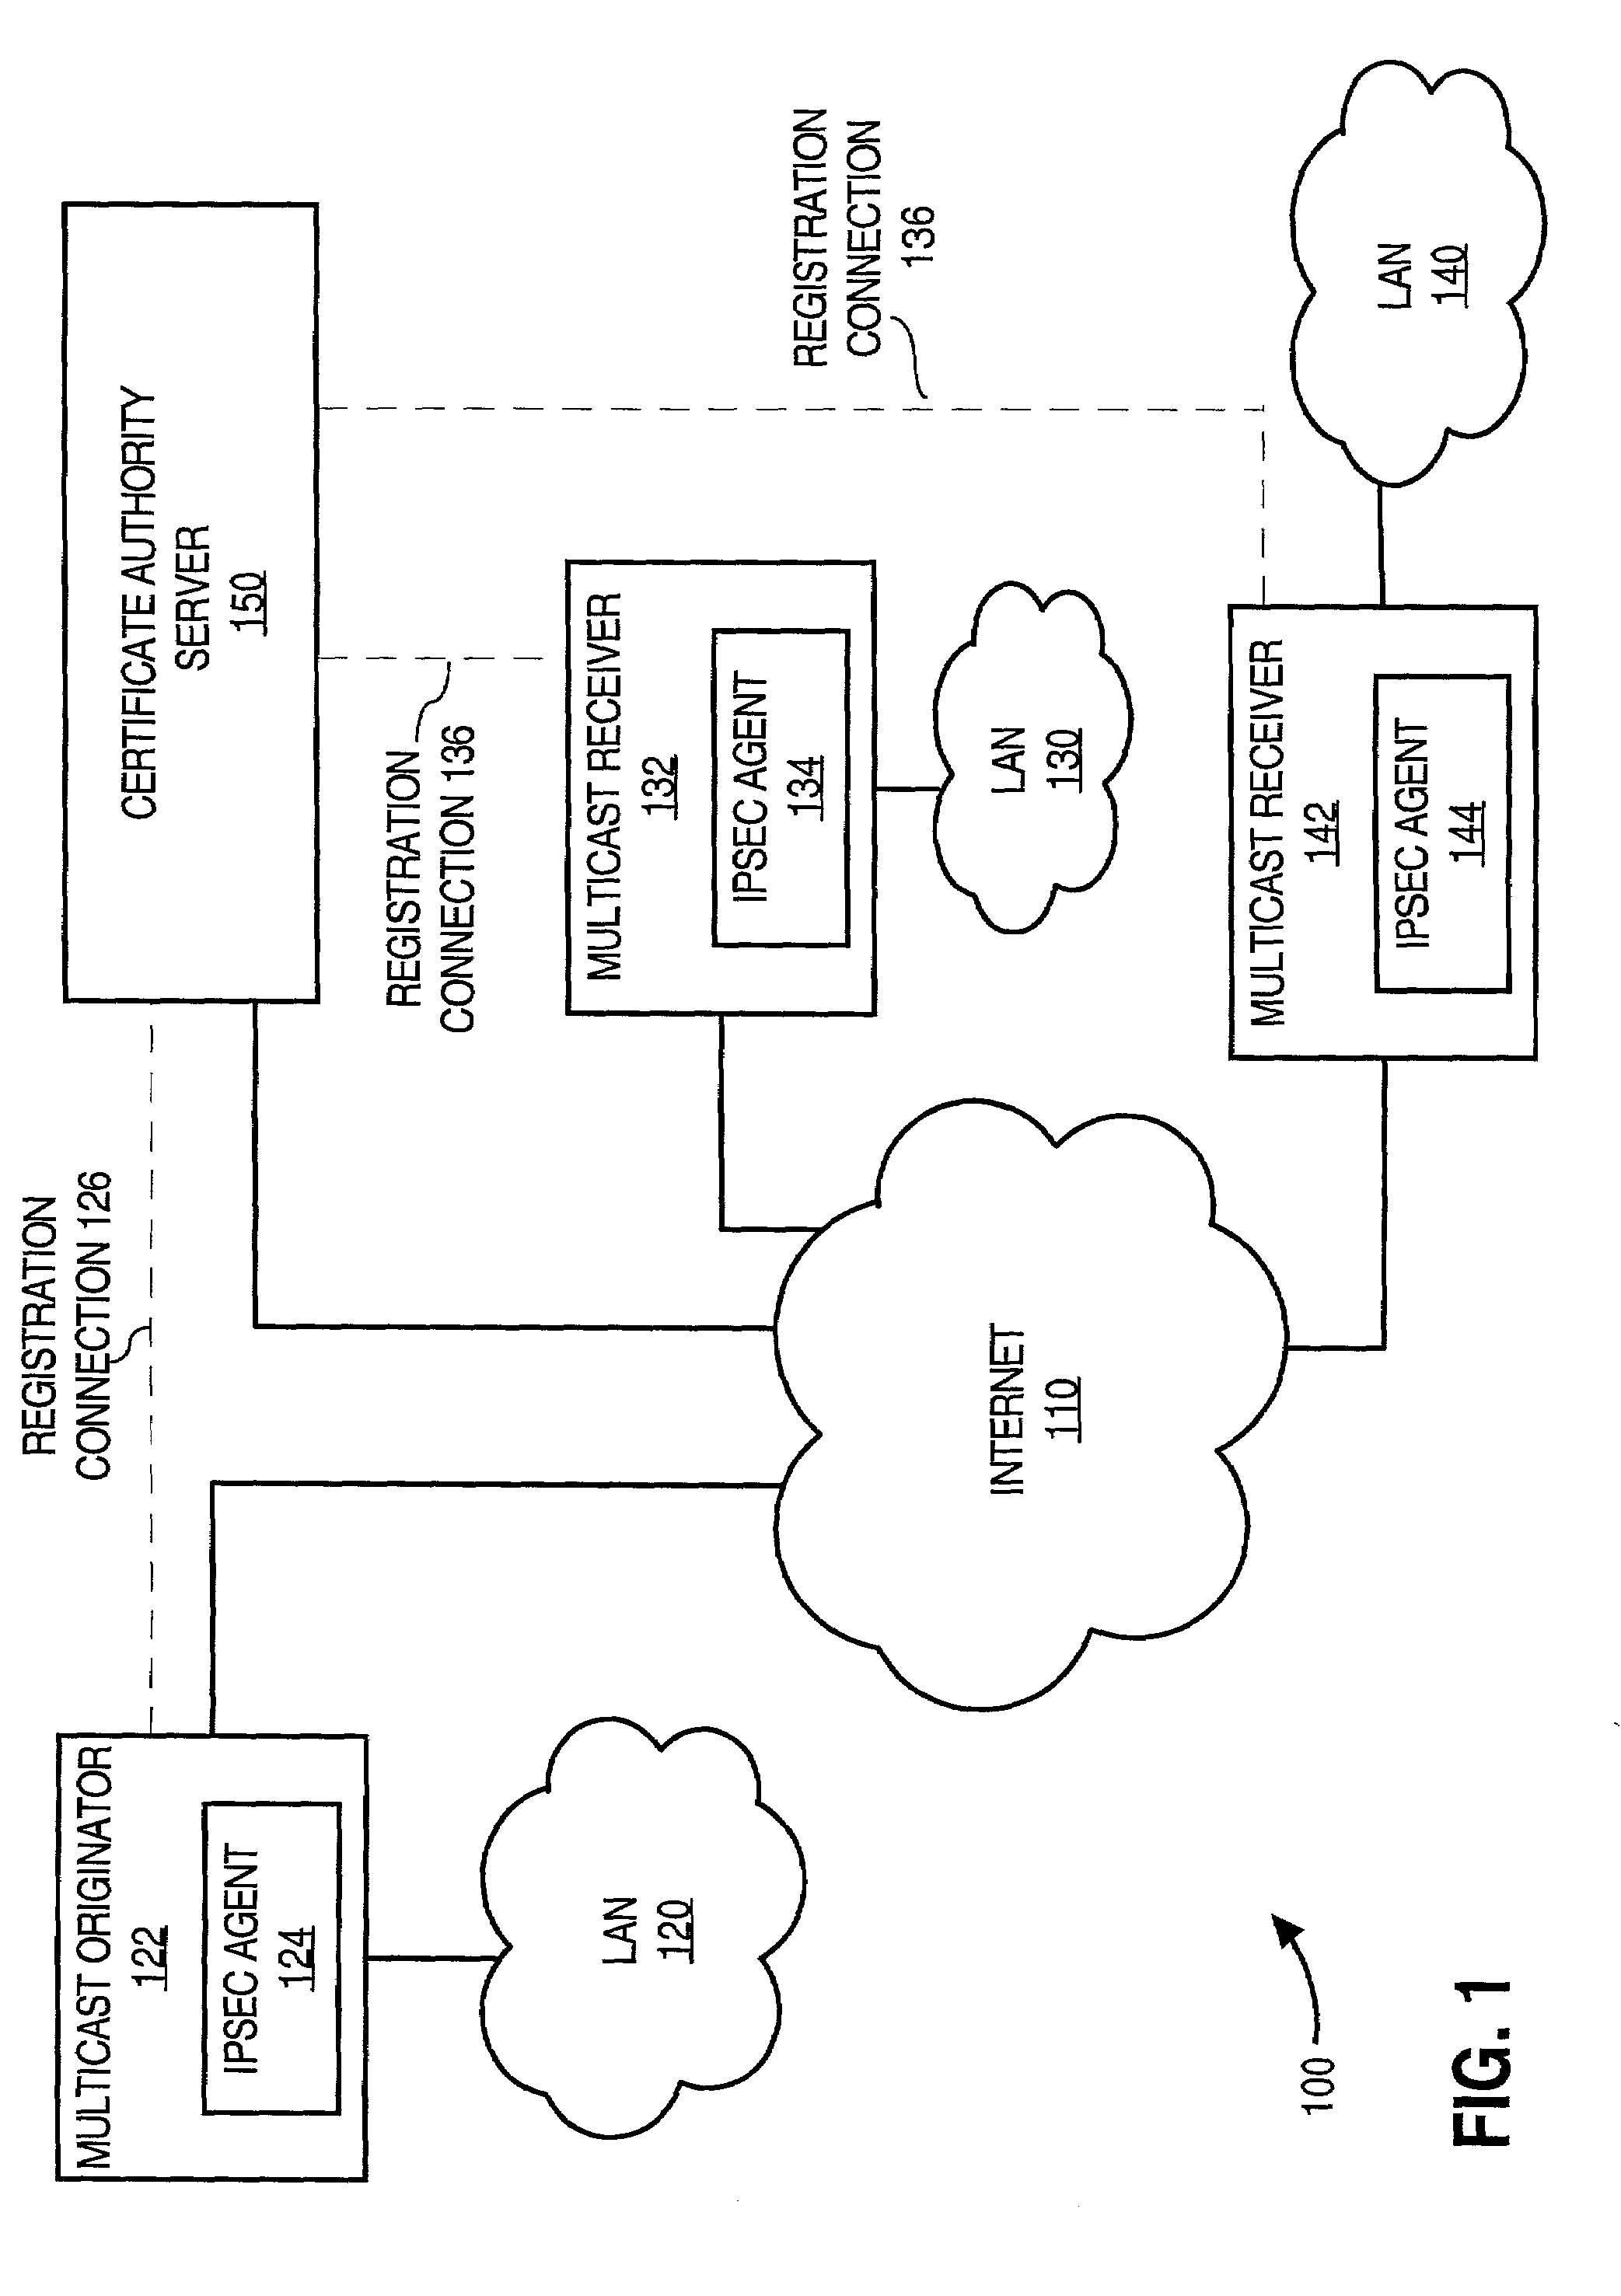 Facilitating secure communications among multicast nodes in a telecommunications network